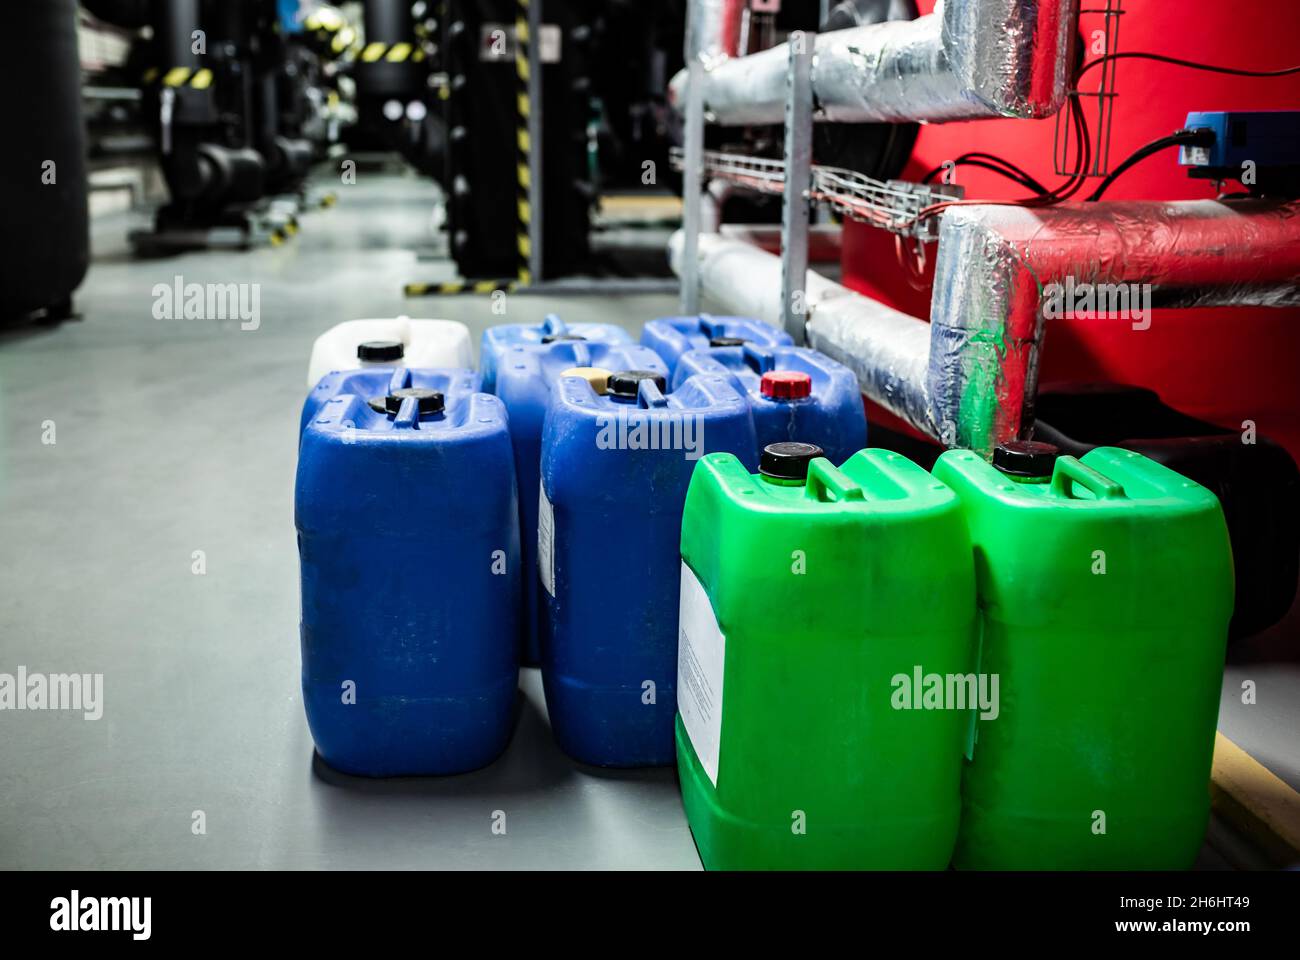 Barrels with chemicals in a chemical warehouse, colored containers Stock Photo